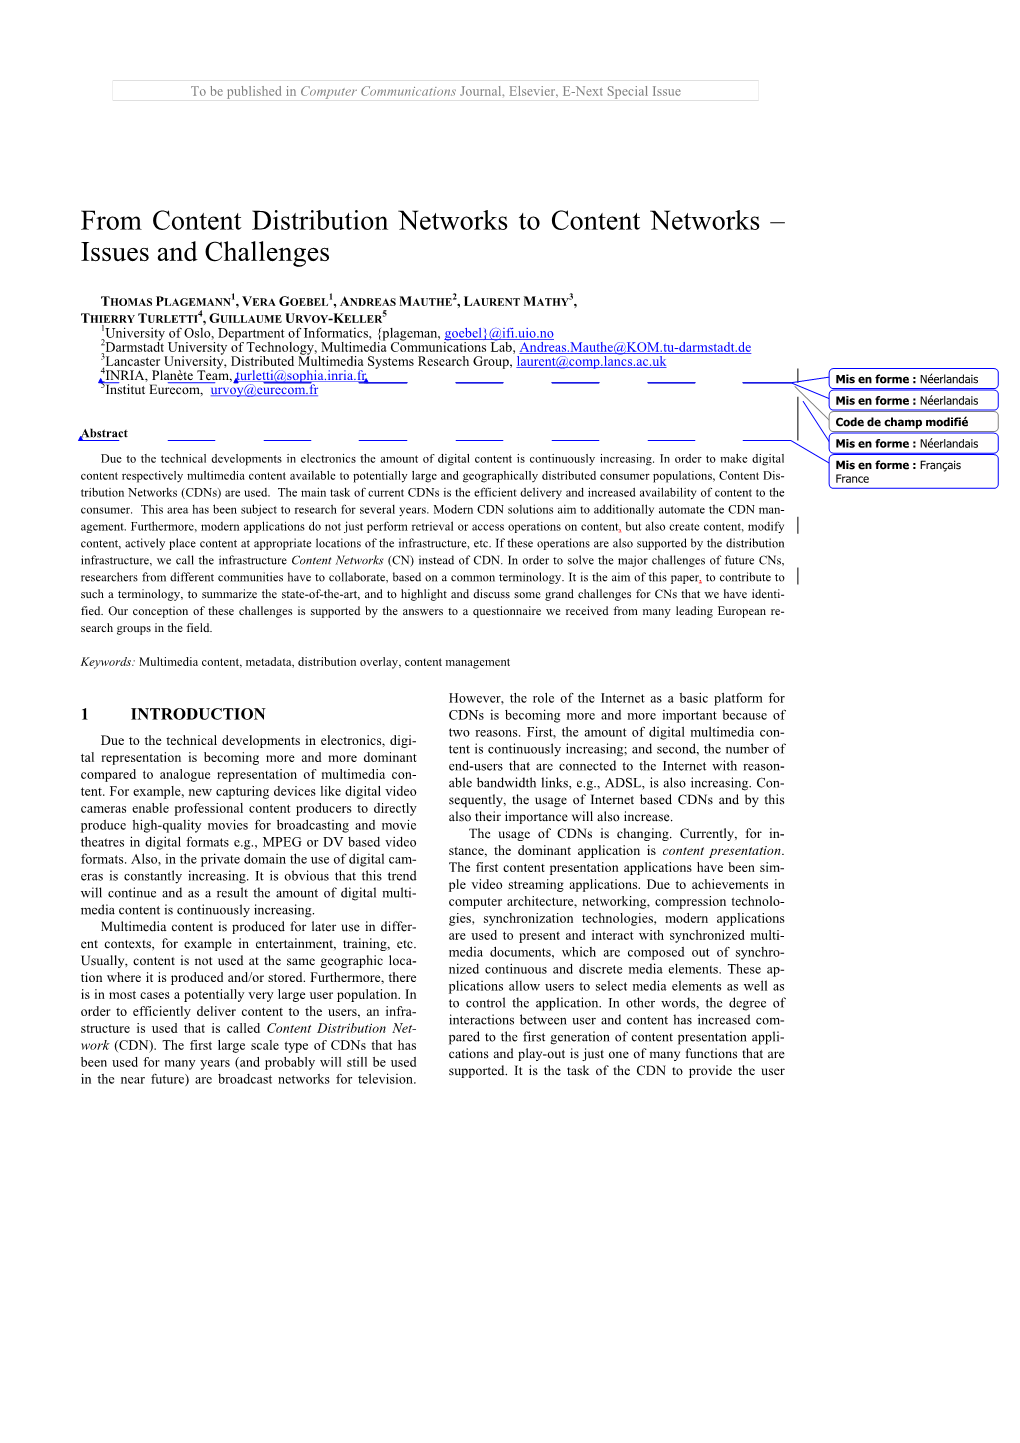 From Content Distribution Networks to Content Networks – Issues and Challenges